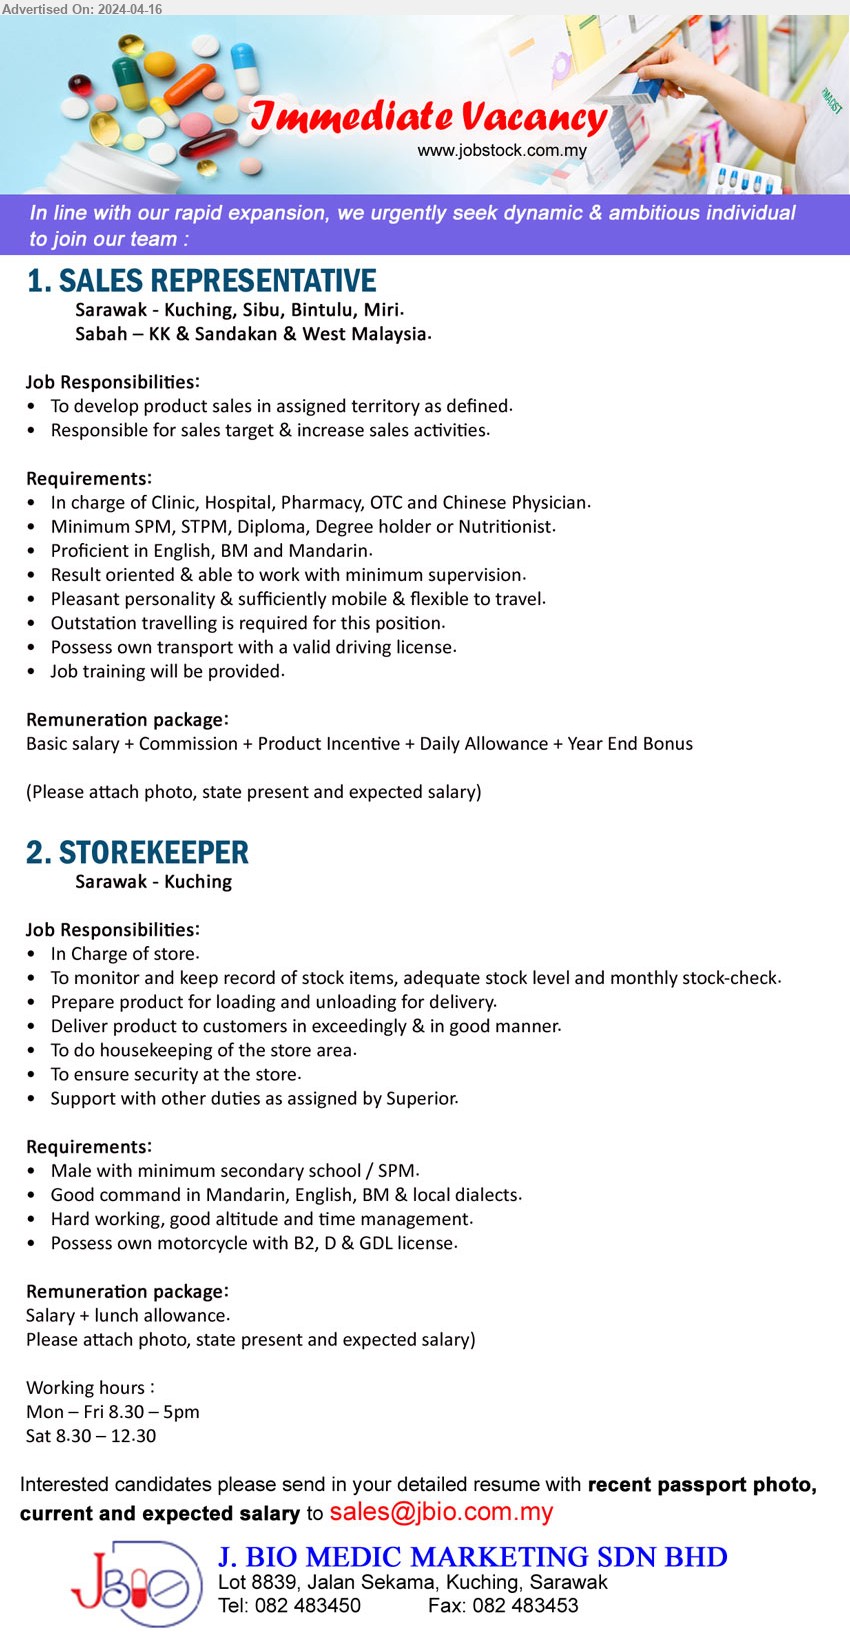 J.BIO MEDIC MARKETING SDN BHD - 1. SALES REPRESENTATIVE  (Sarawak, Sabah, West Malaysia),  SPM, STPM, Diploma, Degree, In charge of Clinic, Hospital, Pharmacy, OTC and Chinese Physician,...
2. STOREKEEPER (Kuching), SPM, Male with minimum secondary school / SPM, Possess own motorcycle with B2, D & GDL license.,...
Call 082-483450 / Email resume to ...